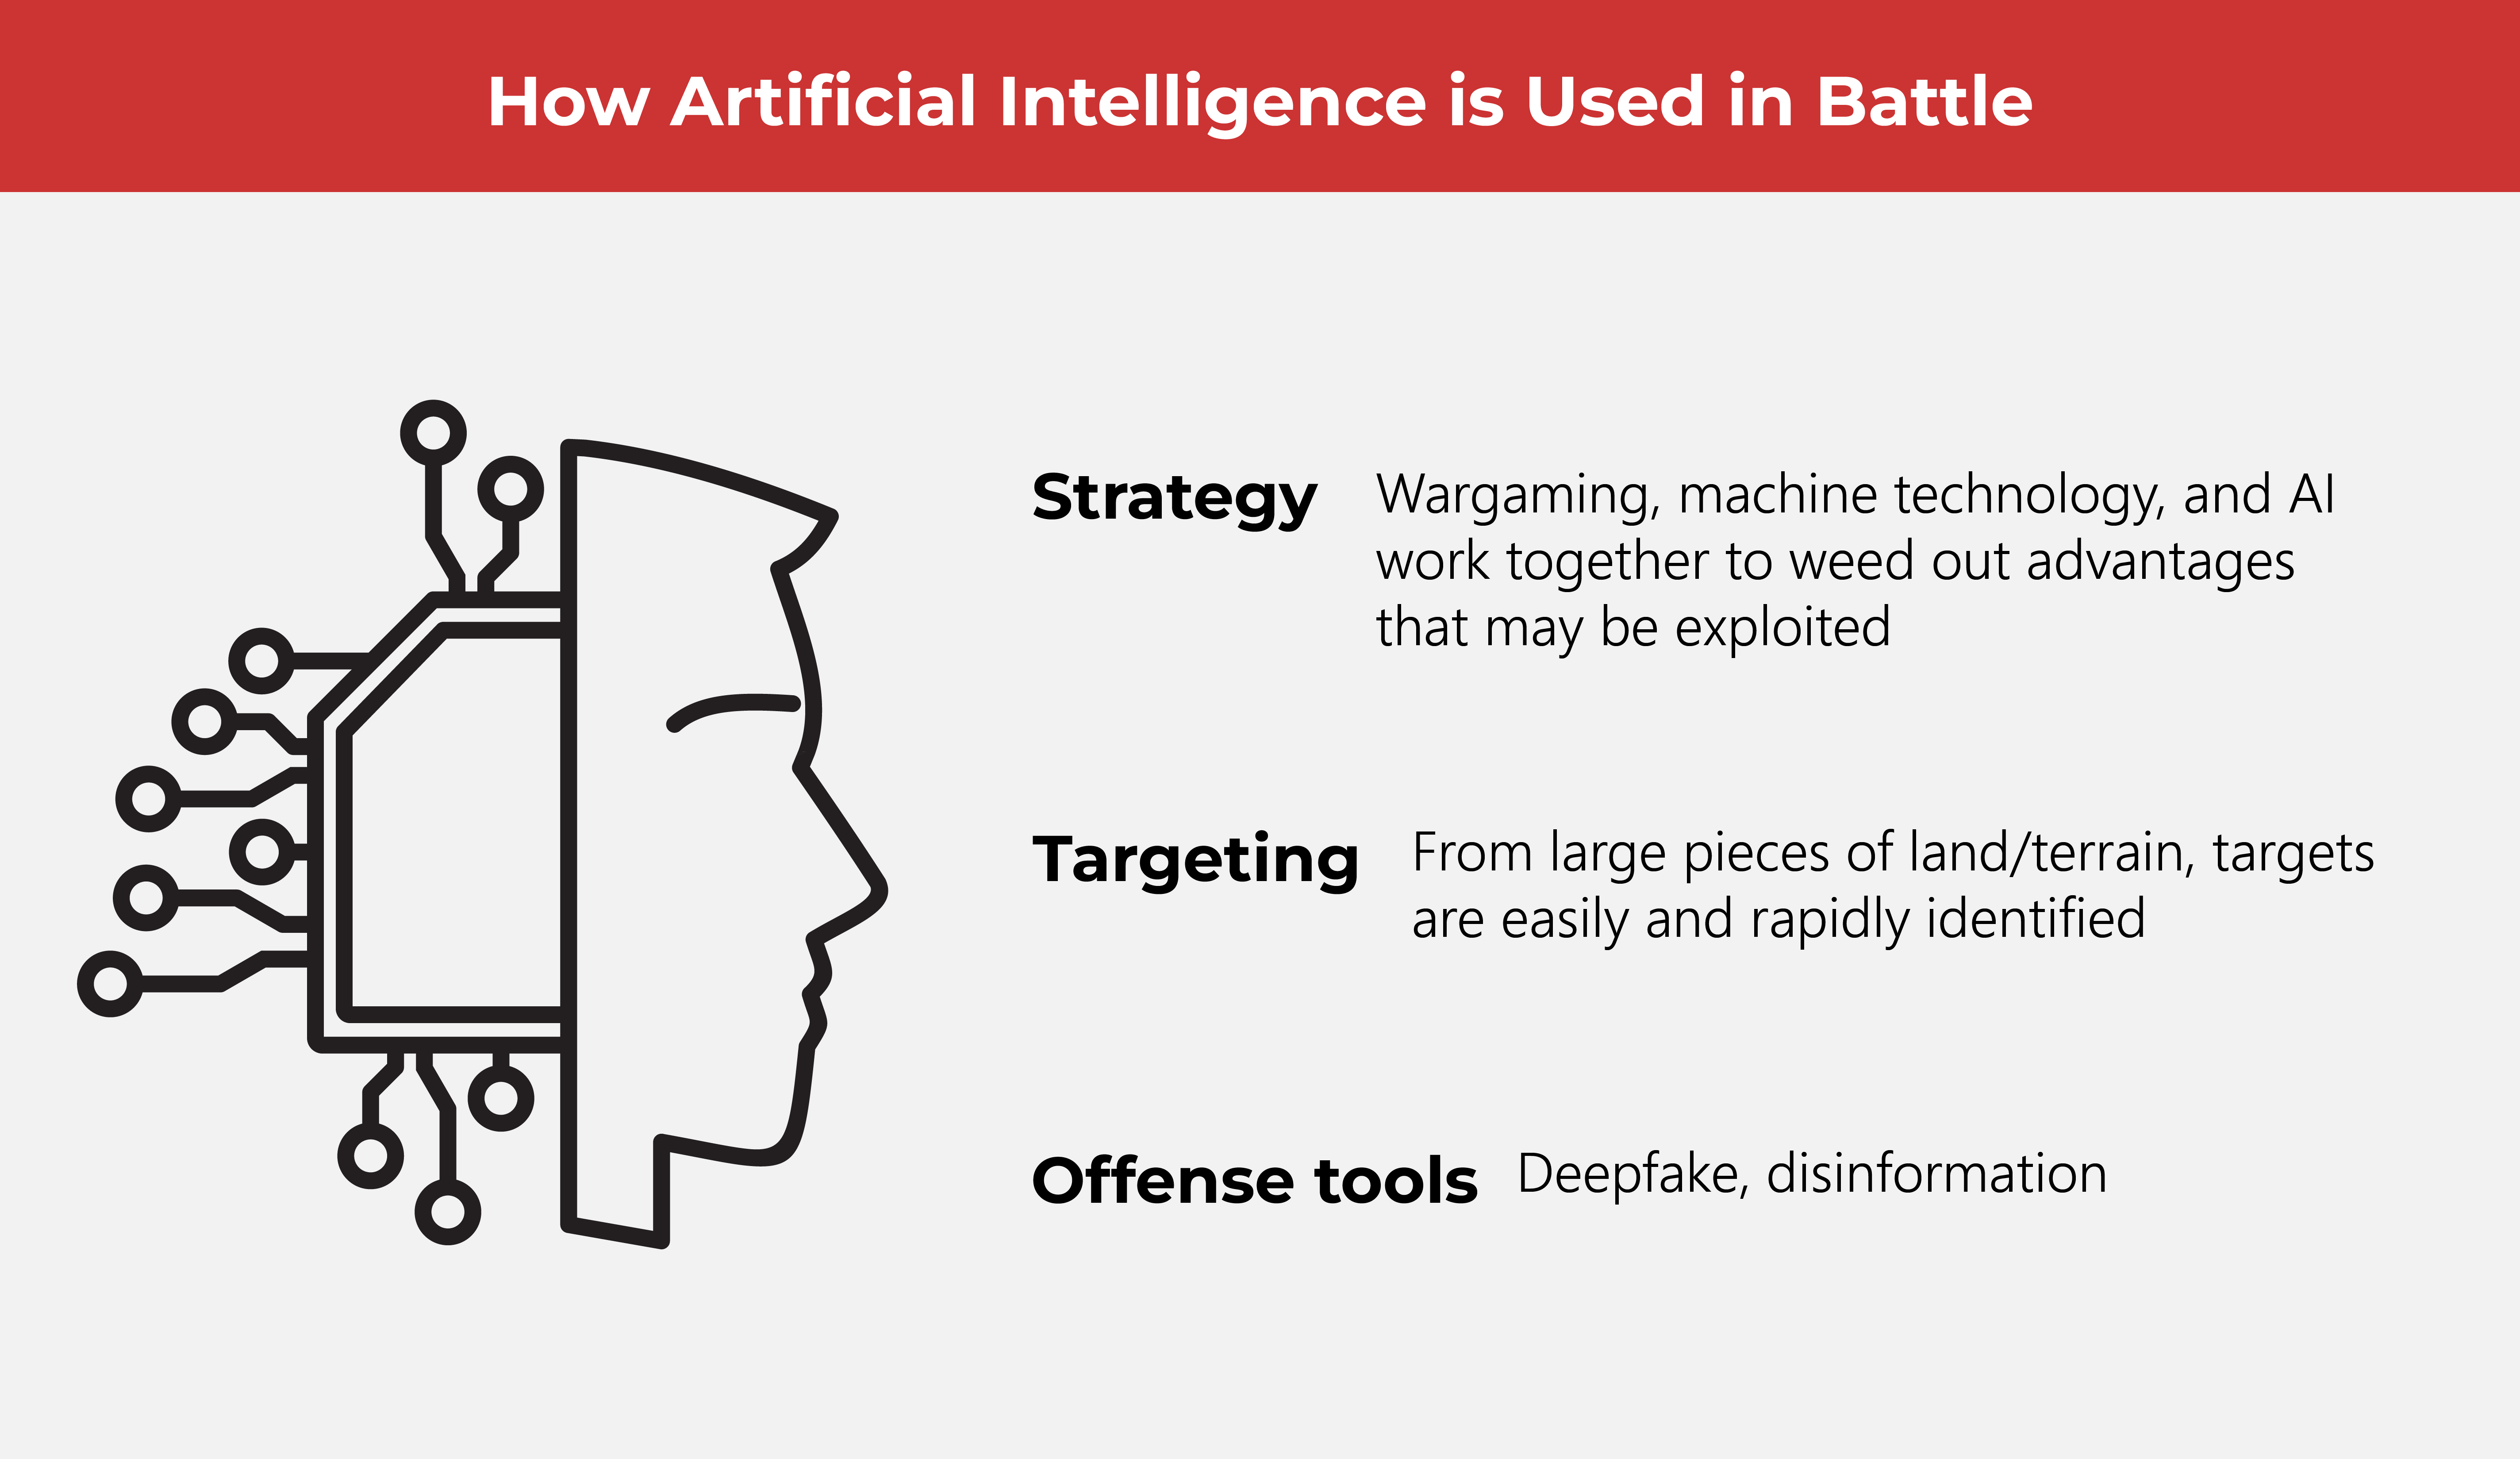 How Artificial Intelligence is Used in Battle